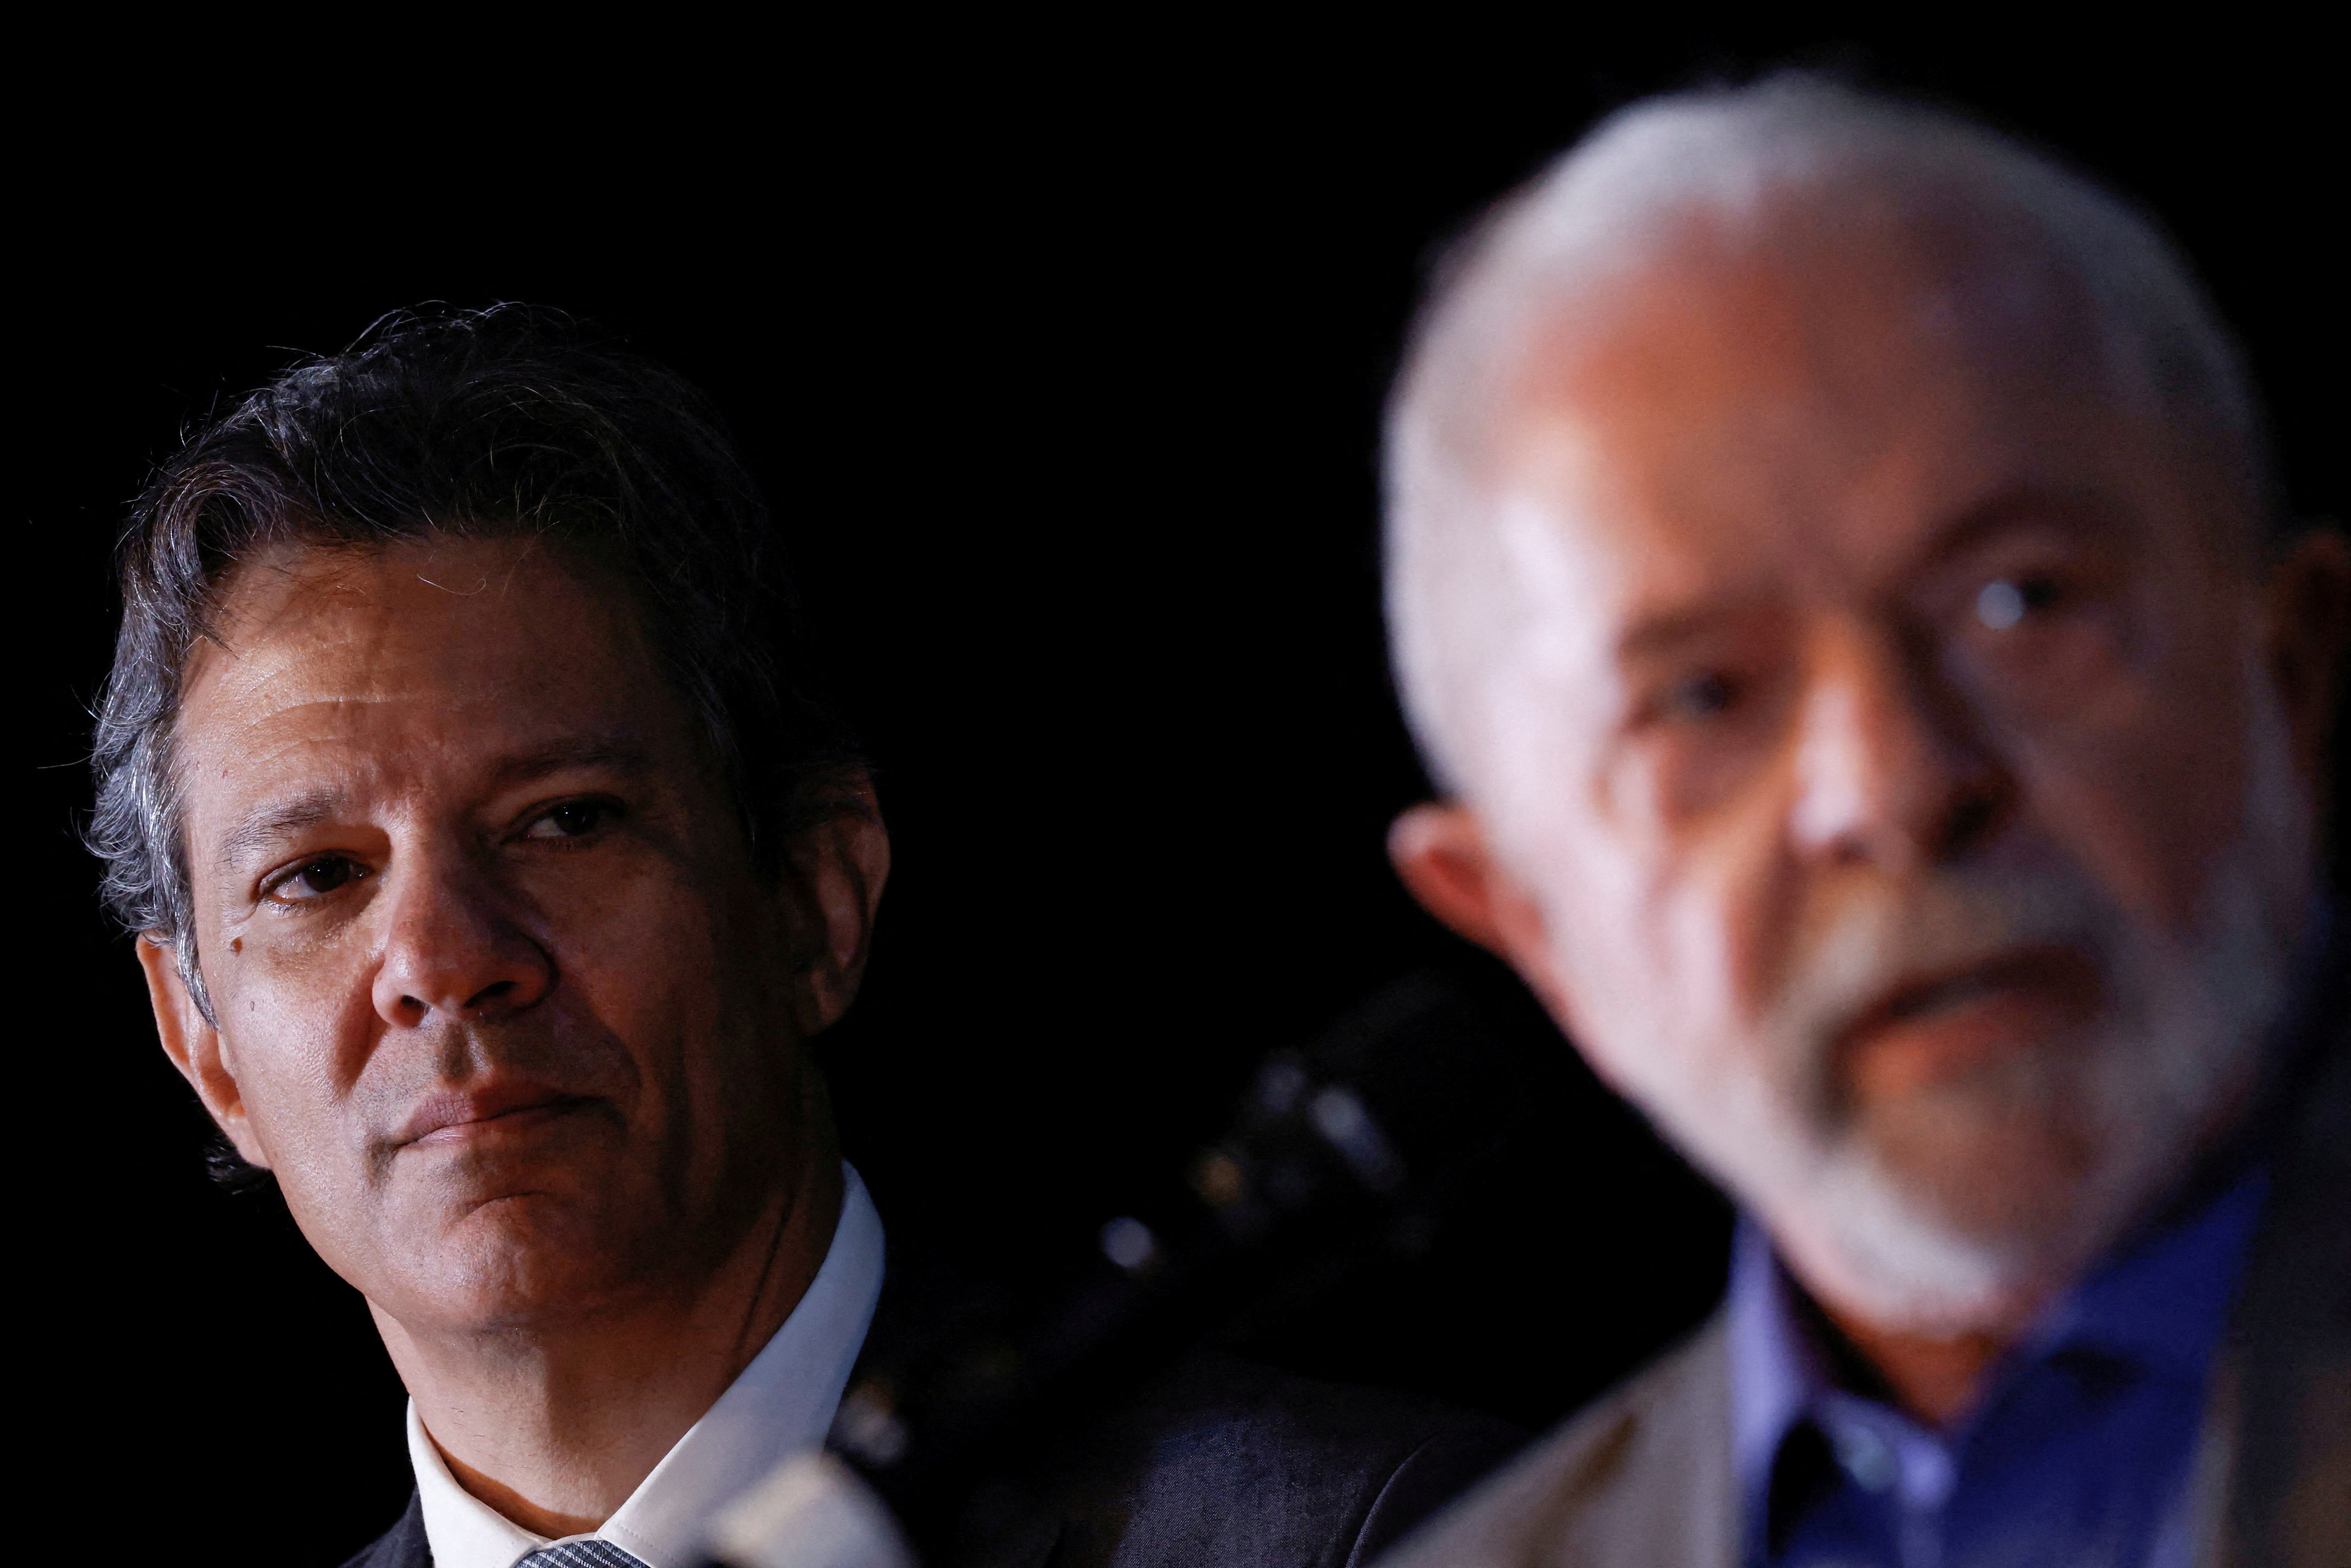 Brazil's economy minister nominee Fernando Haddad looks on as President-elect Luiz Inacio Lula da Silva talks during a news conference at the transition government building in Brasilia